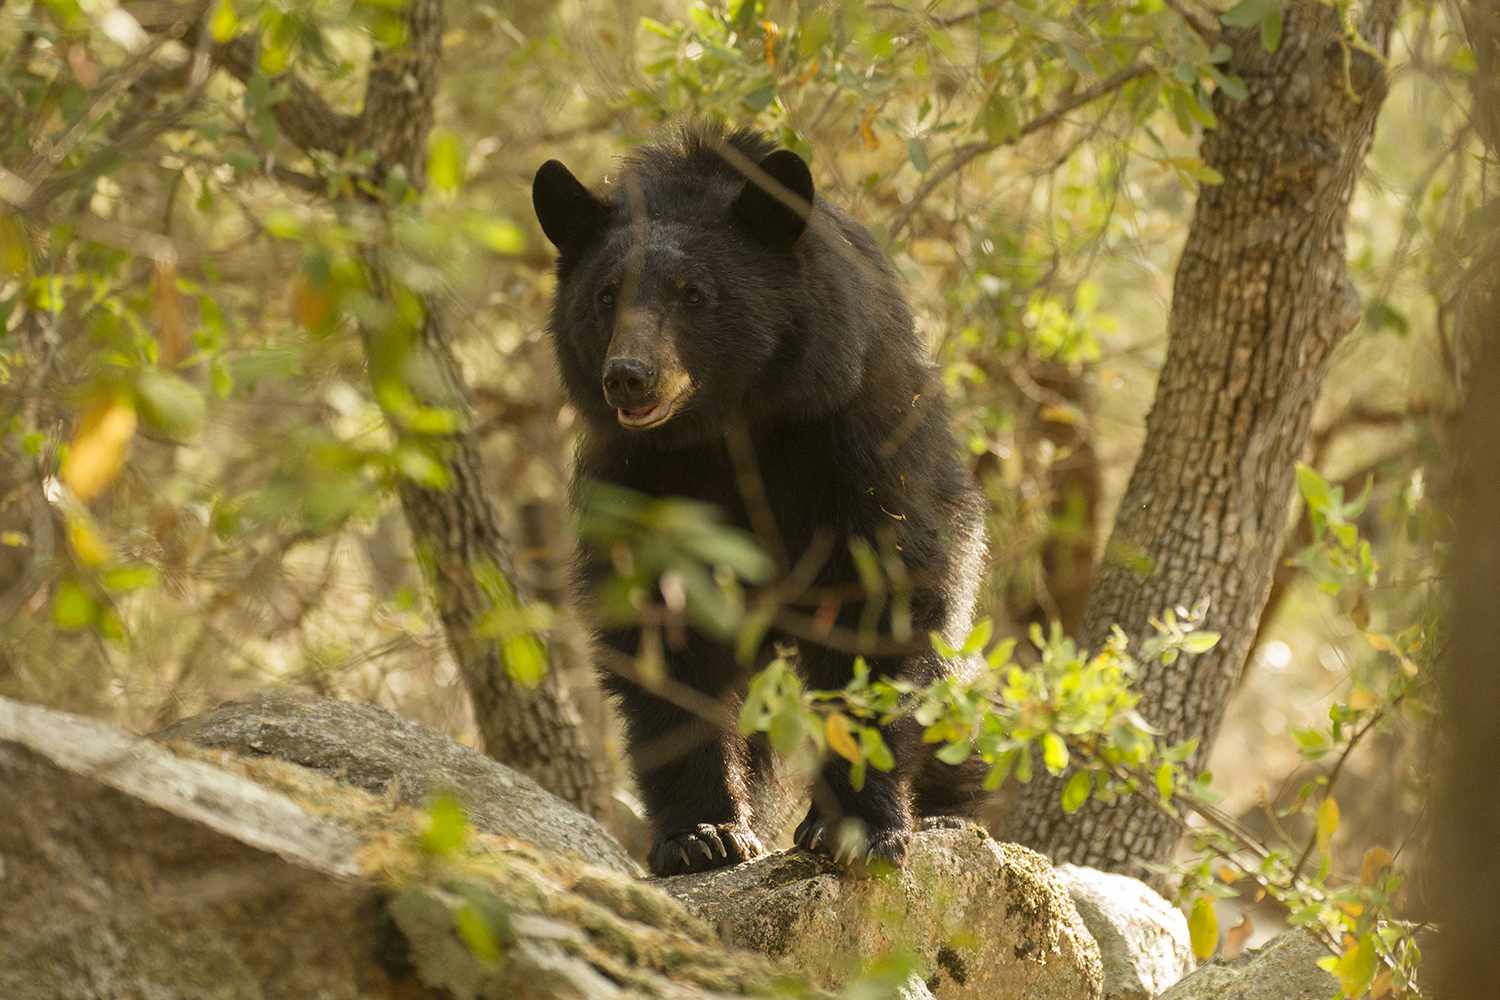 Bear Mauls 15-Year-Old Boy as He Watches TV in Arizona: ‘Got Him on the Nose and the Cheek’